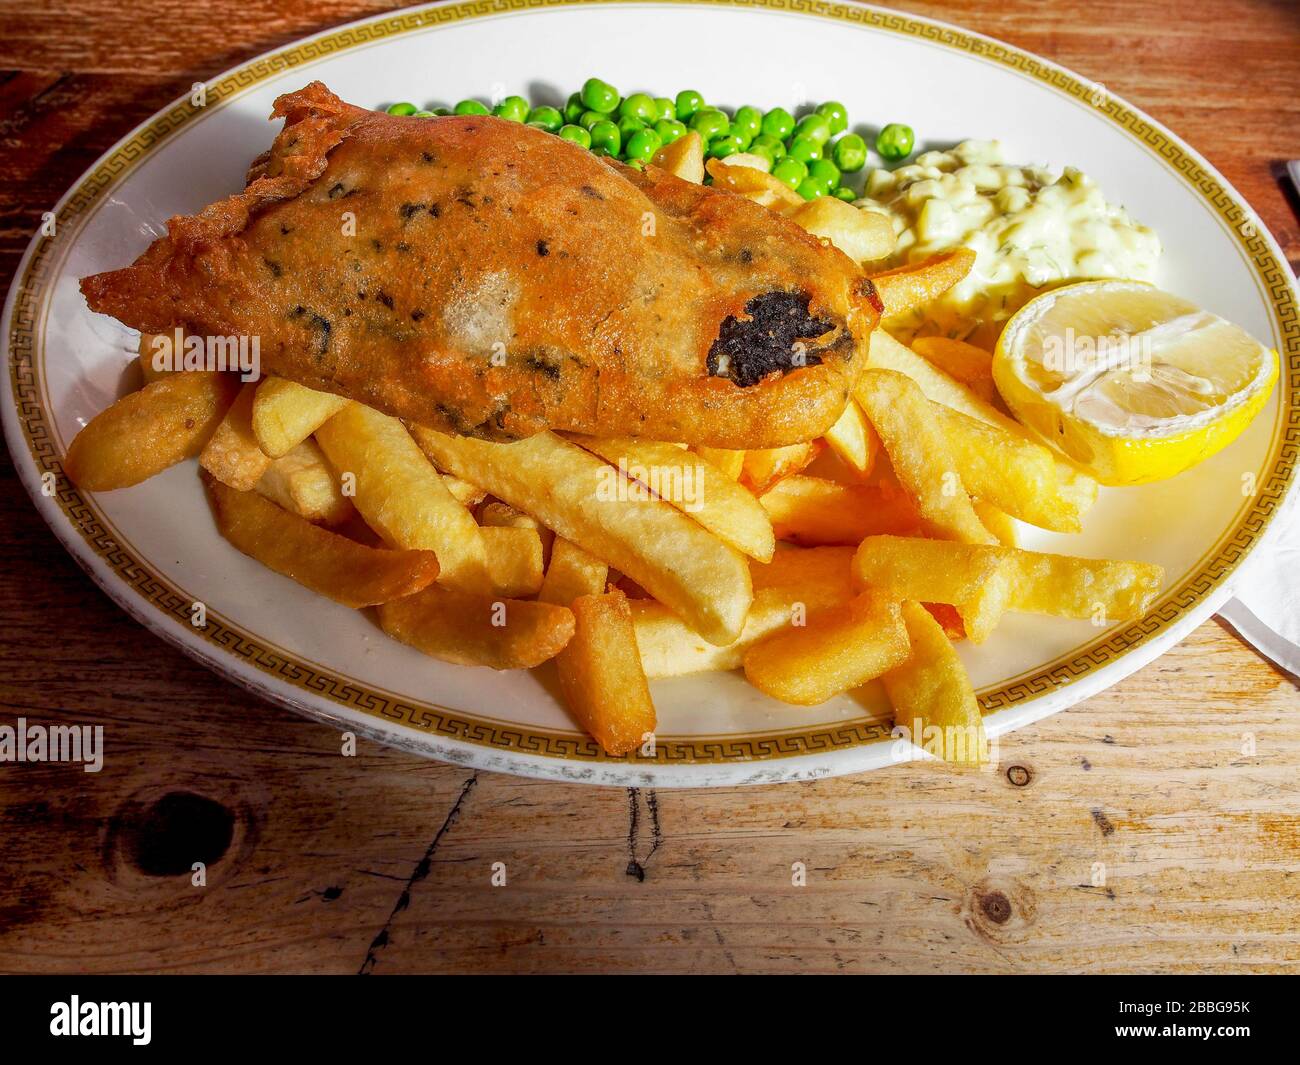 Vegan / Vegetarian Fish and chips : British traditional meal for plant  based diet Stock Photo - Alamy